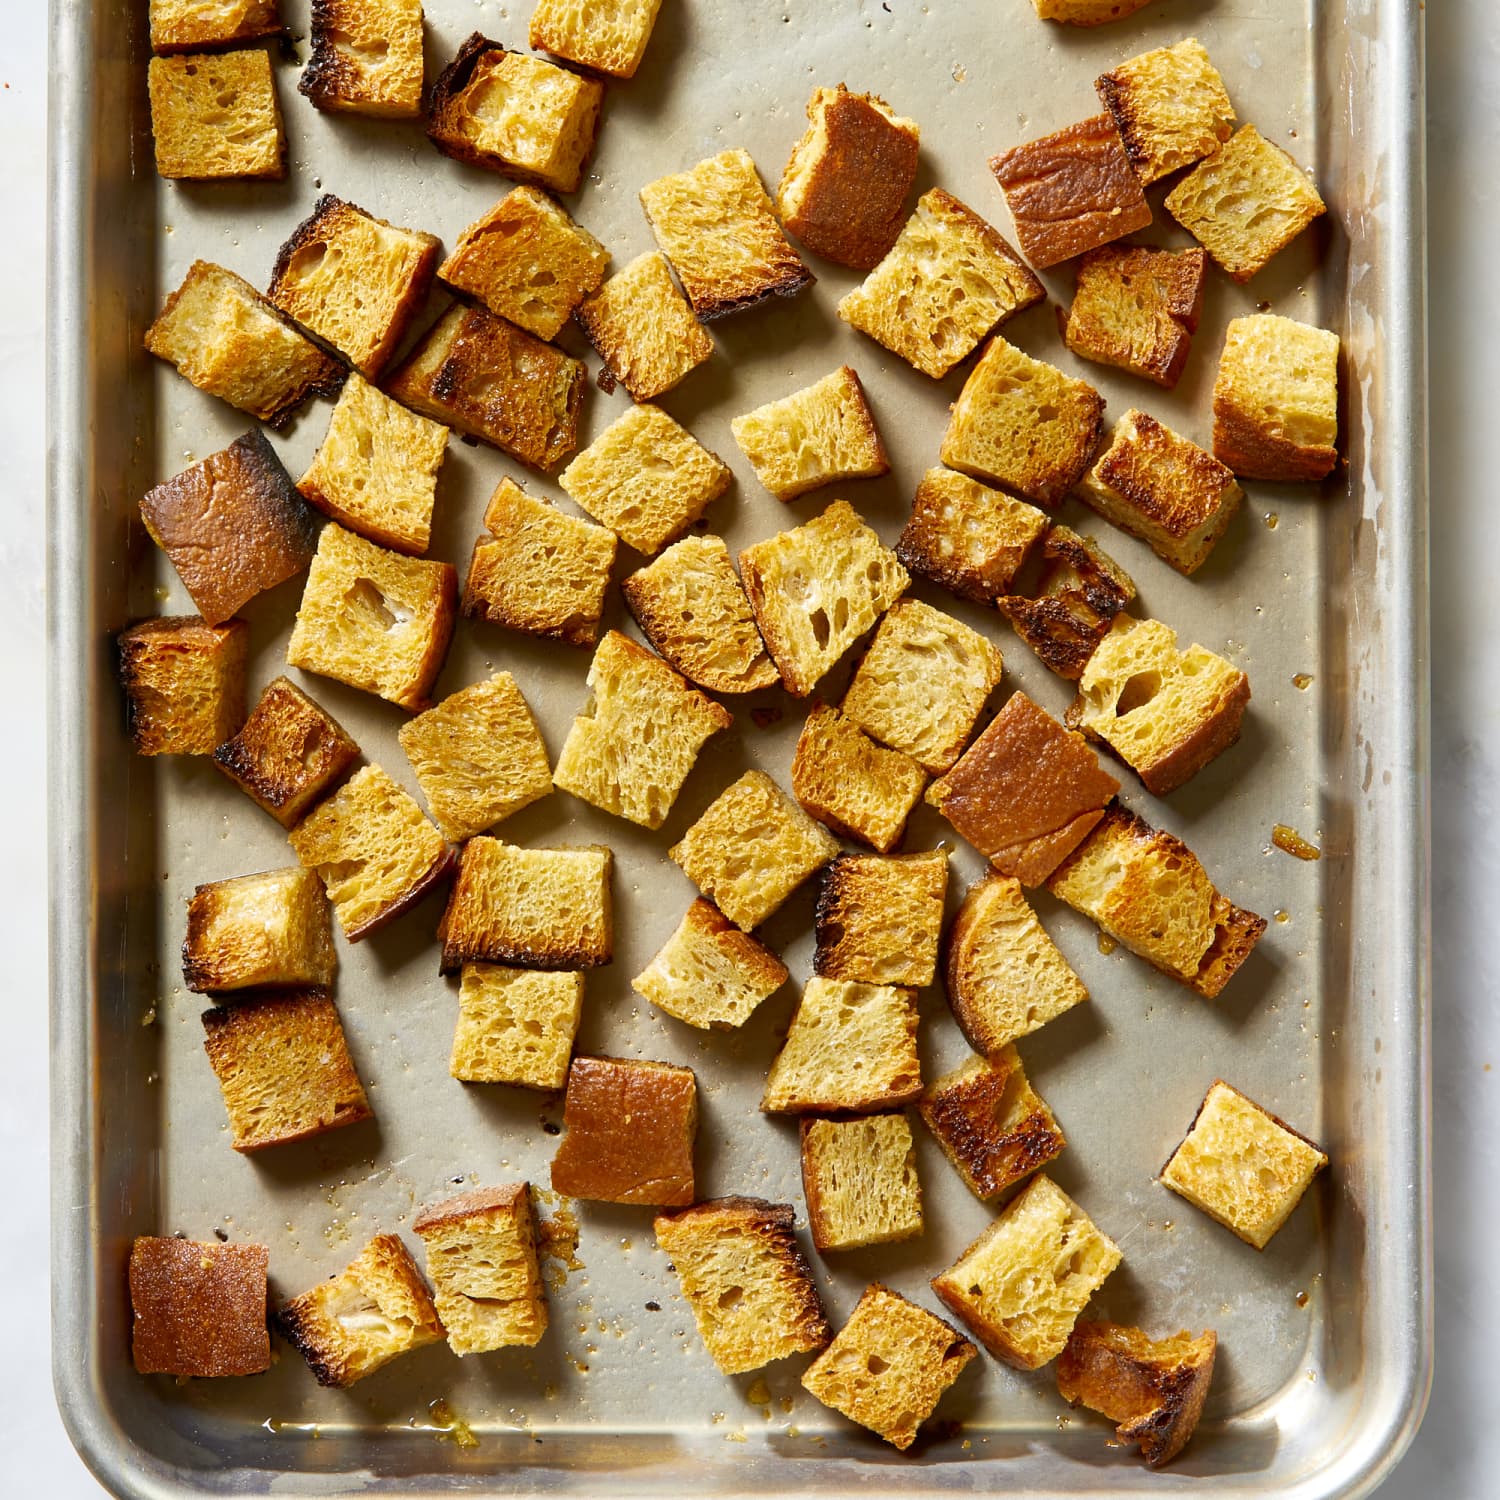 Homemade Croutons Recipe (Oven-Baked)